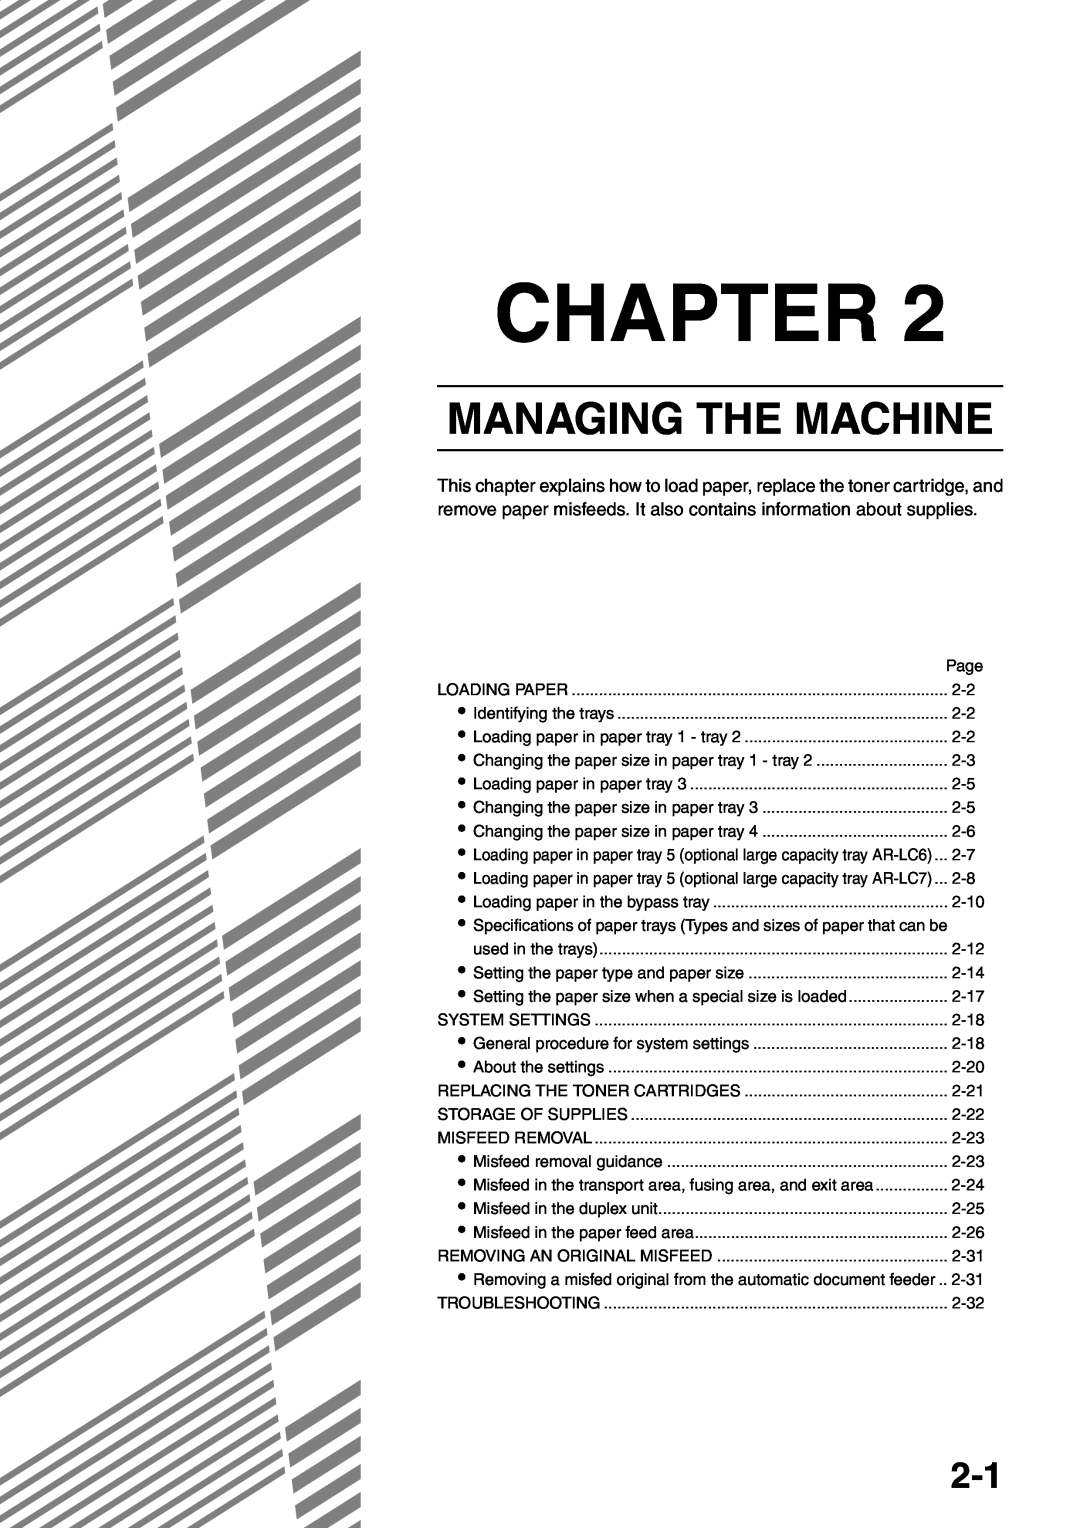 Sharp MX-M550U, MX-M700N, MX-M620N, MX-M700U, MX-M550N, MX-M620U specifications Managing The Machine, Chapter 